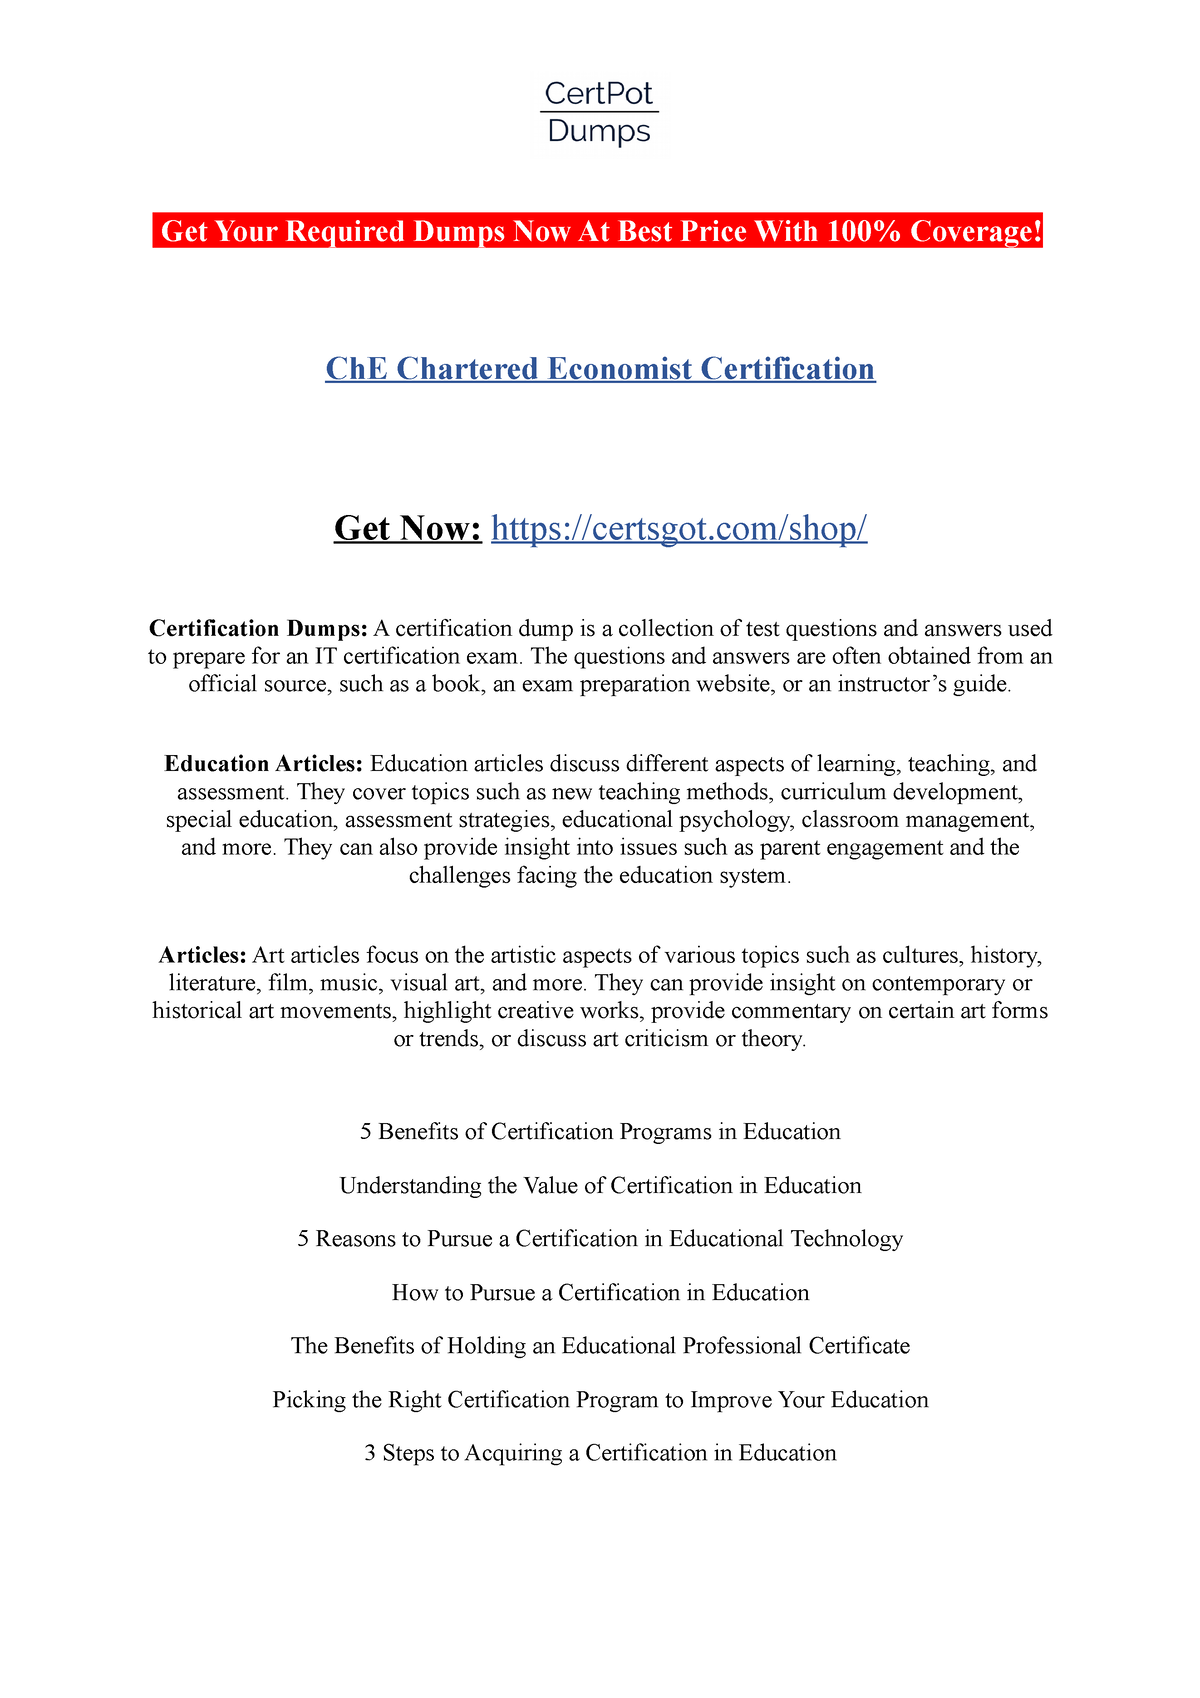 Ch E Chartered Economist Certification Get Your Required Dumps Now At